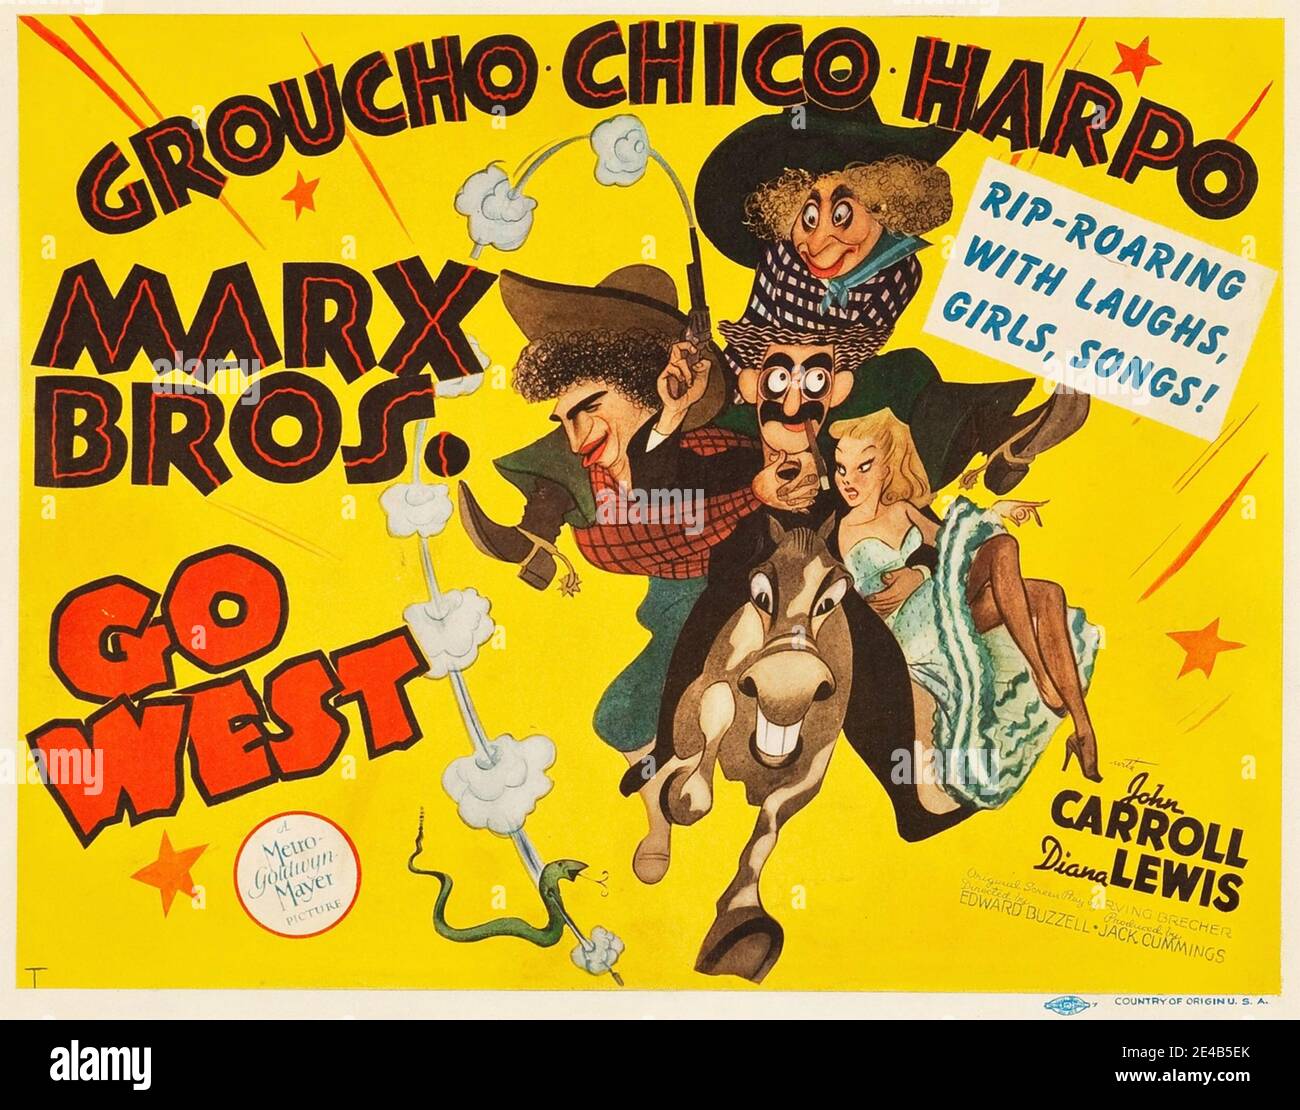 GO WEST 1940 MGM film con i Marx Brothers Foto Stock